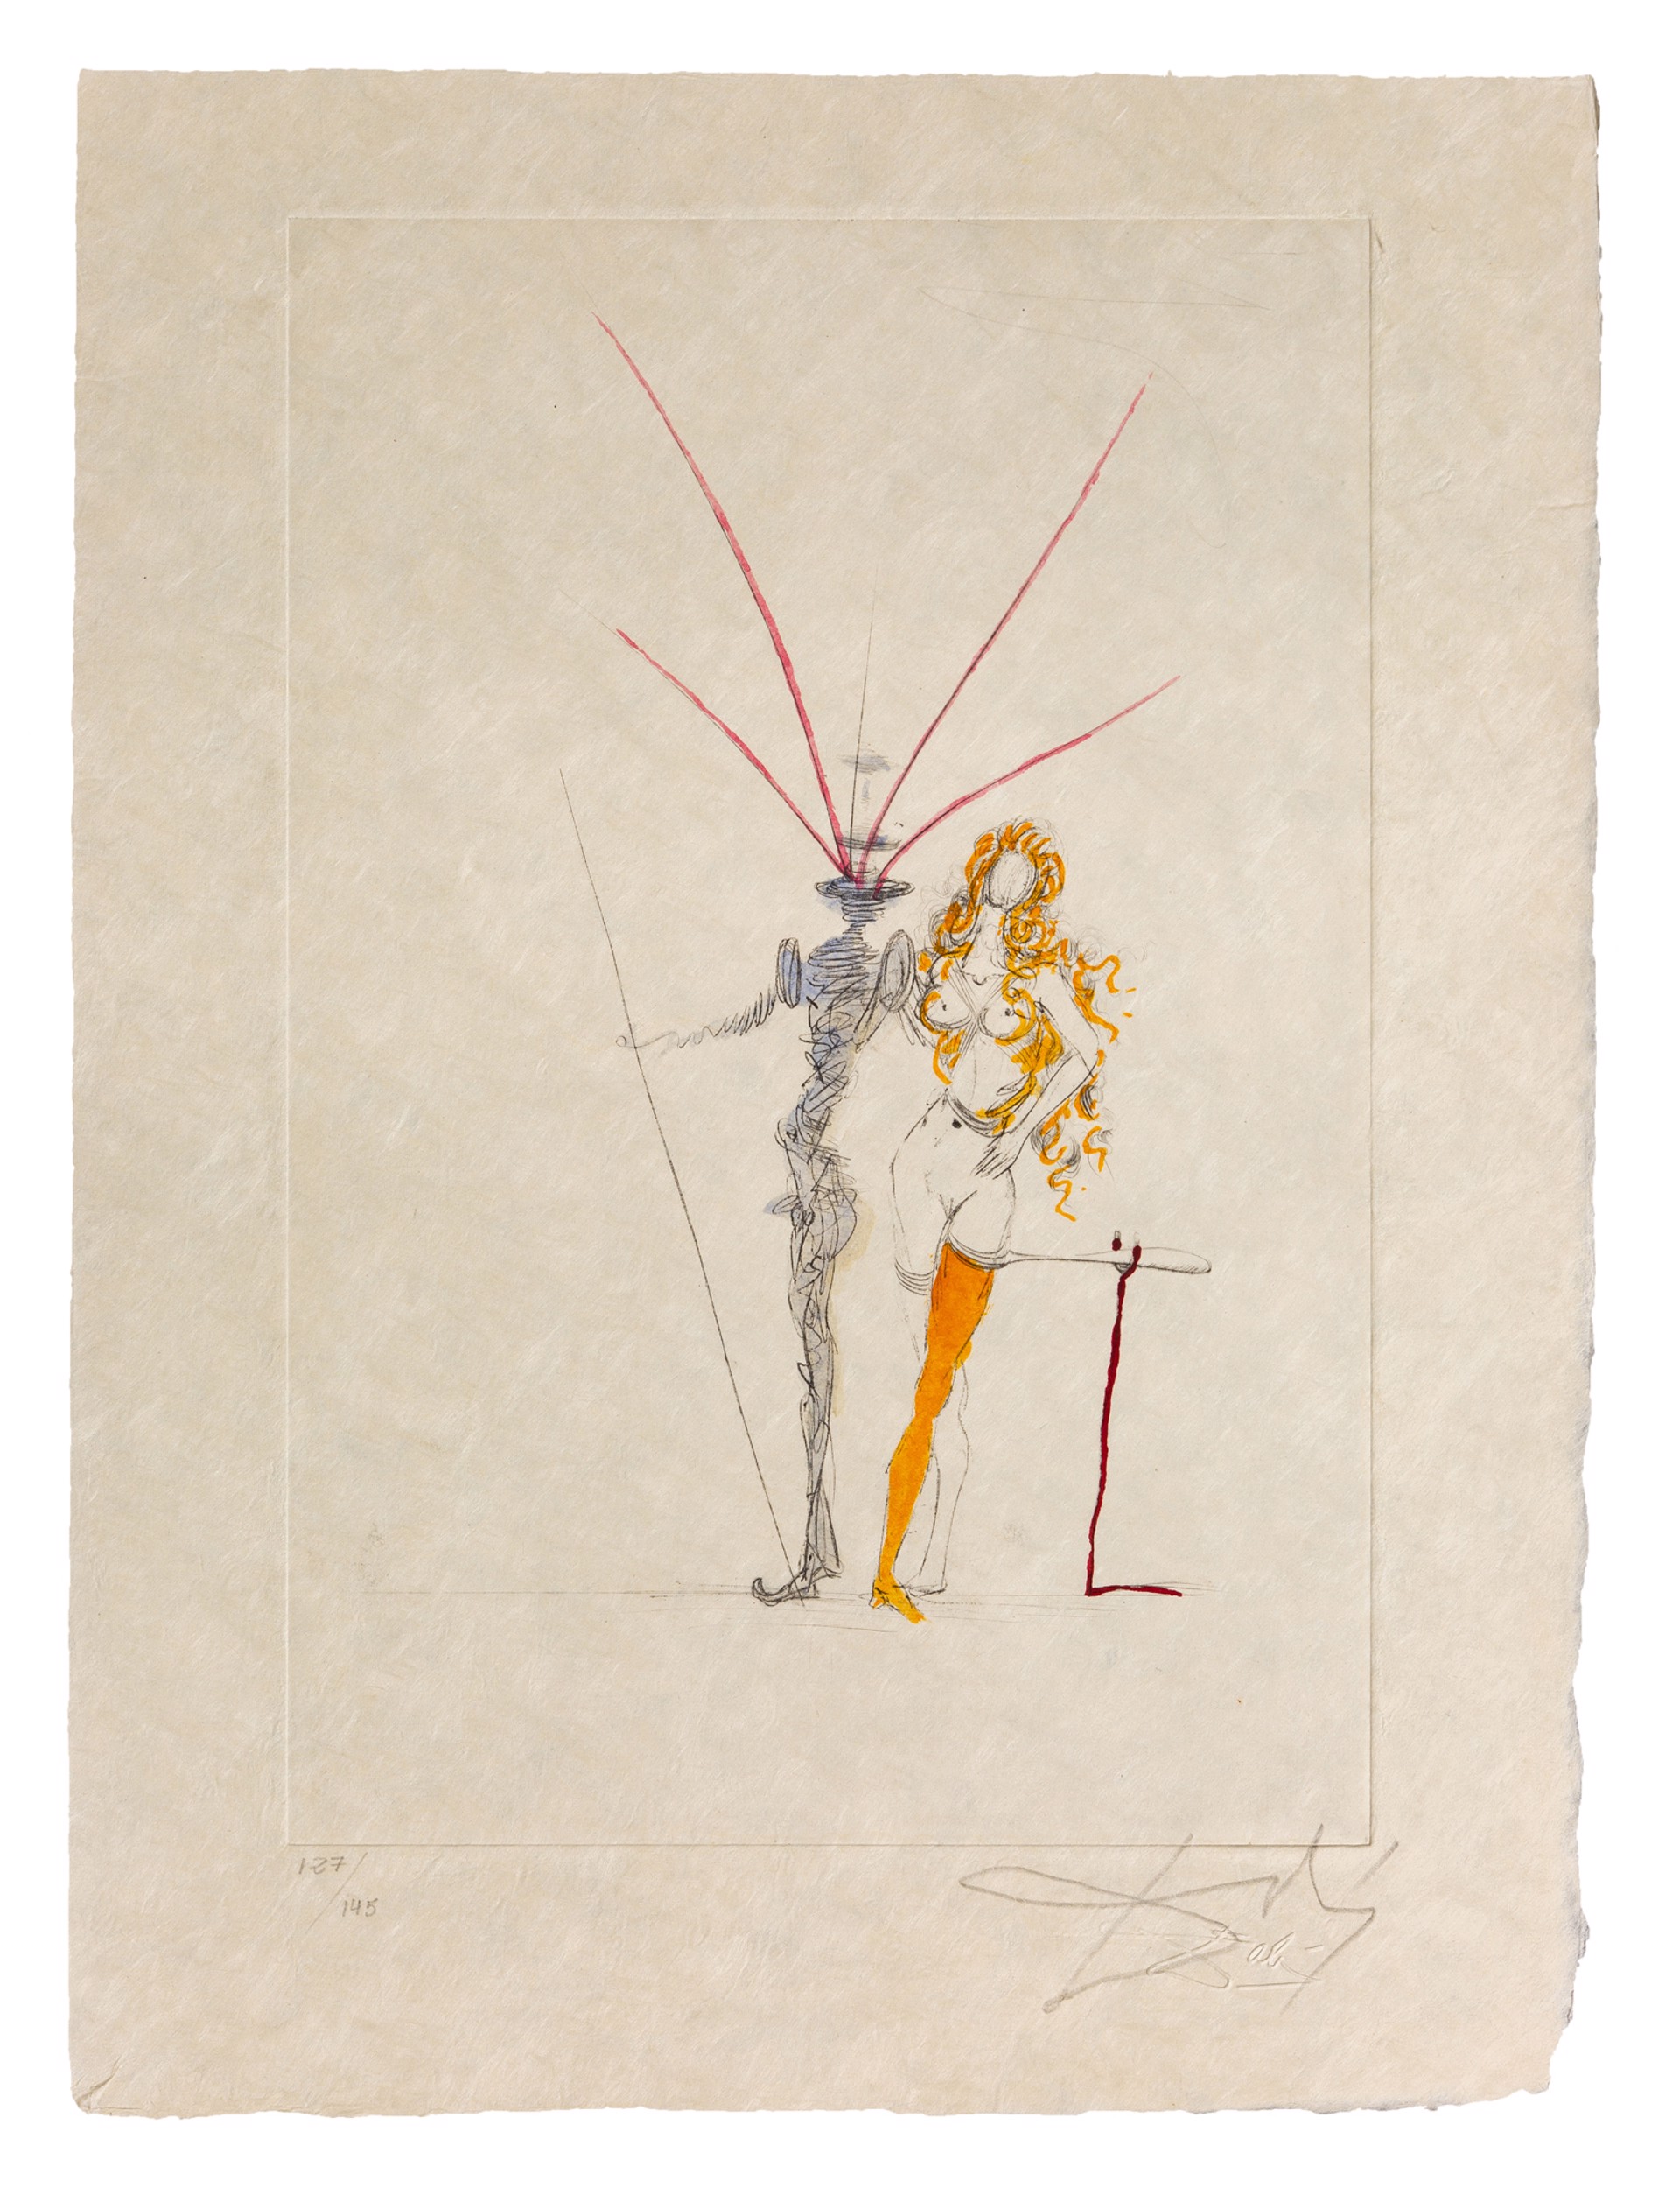 Apollinaire "Couple Frontispiece" by Salvador Dalí